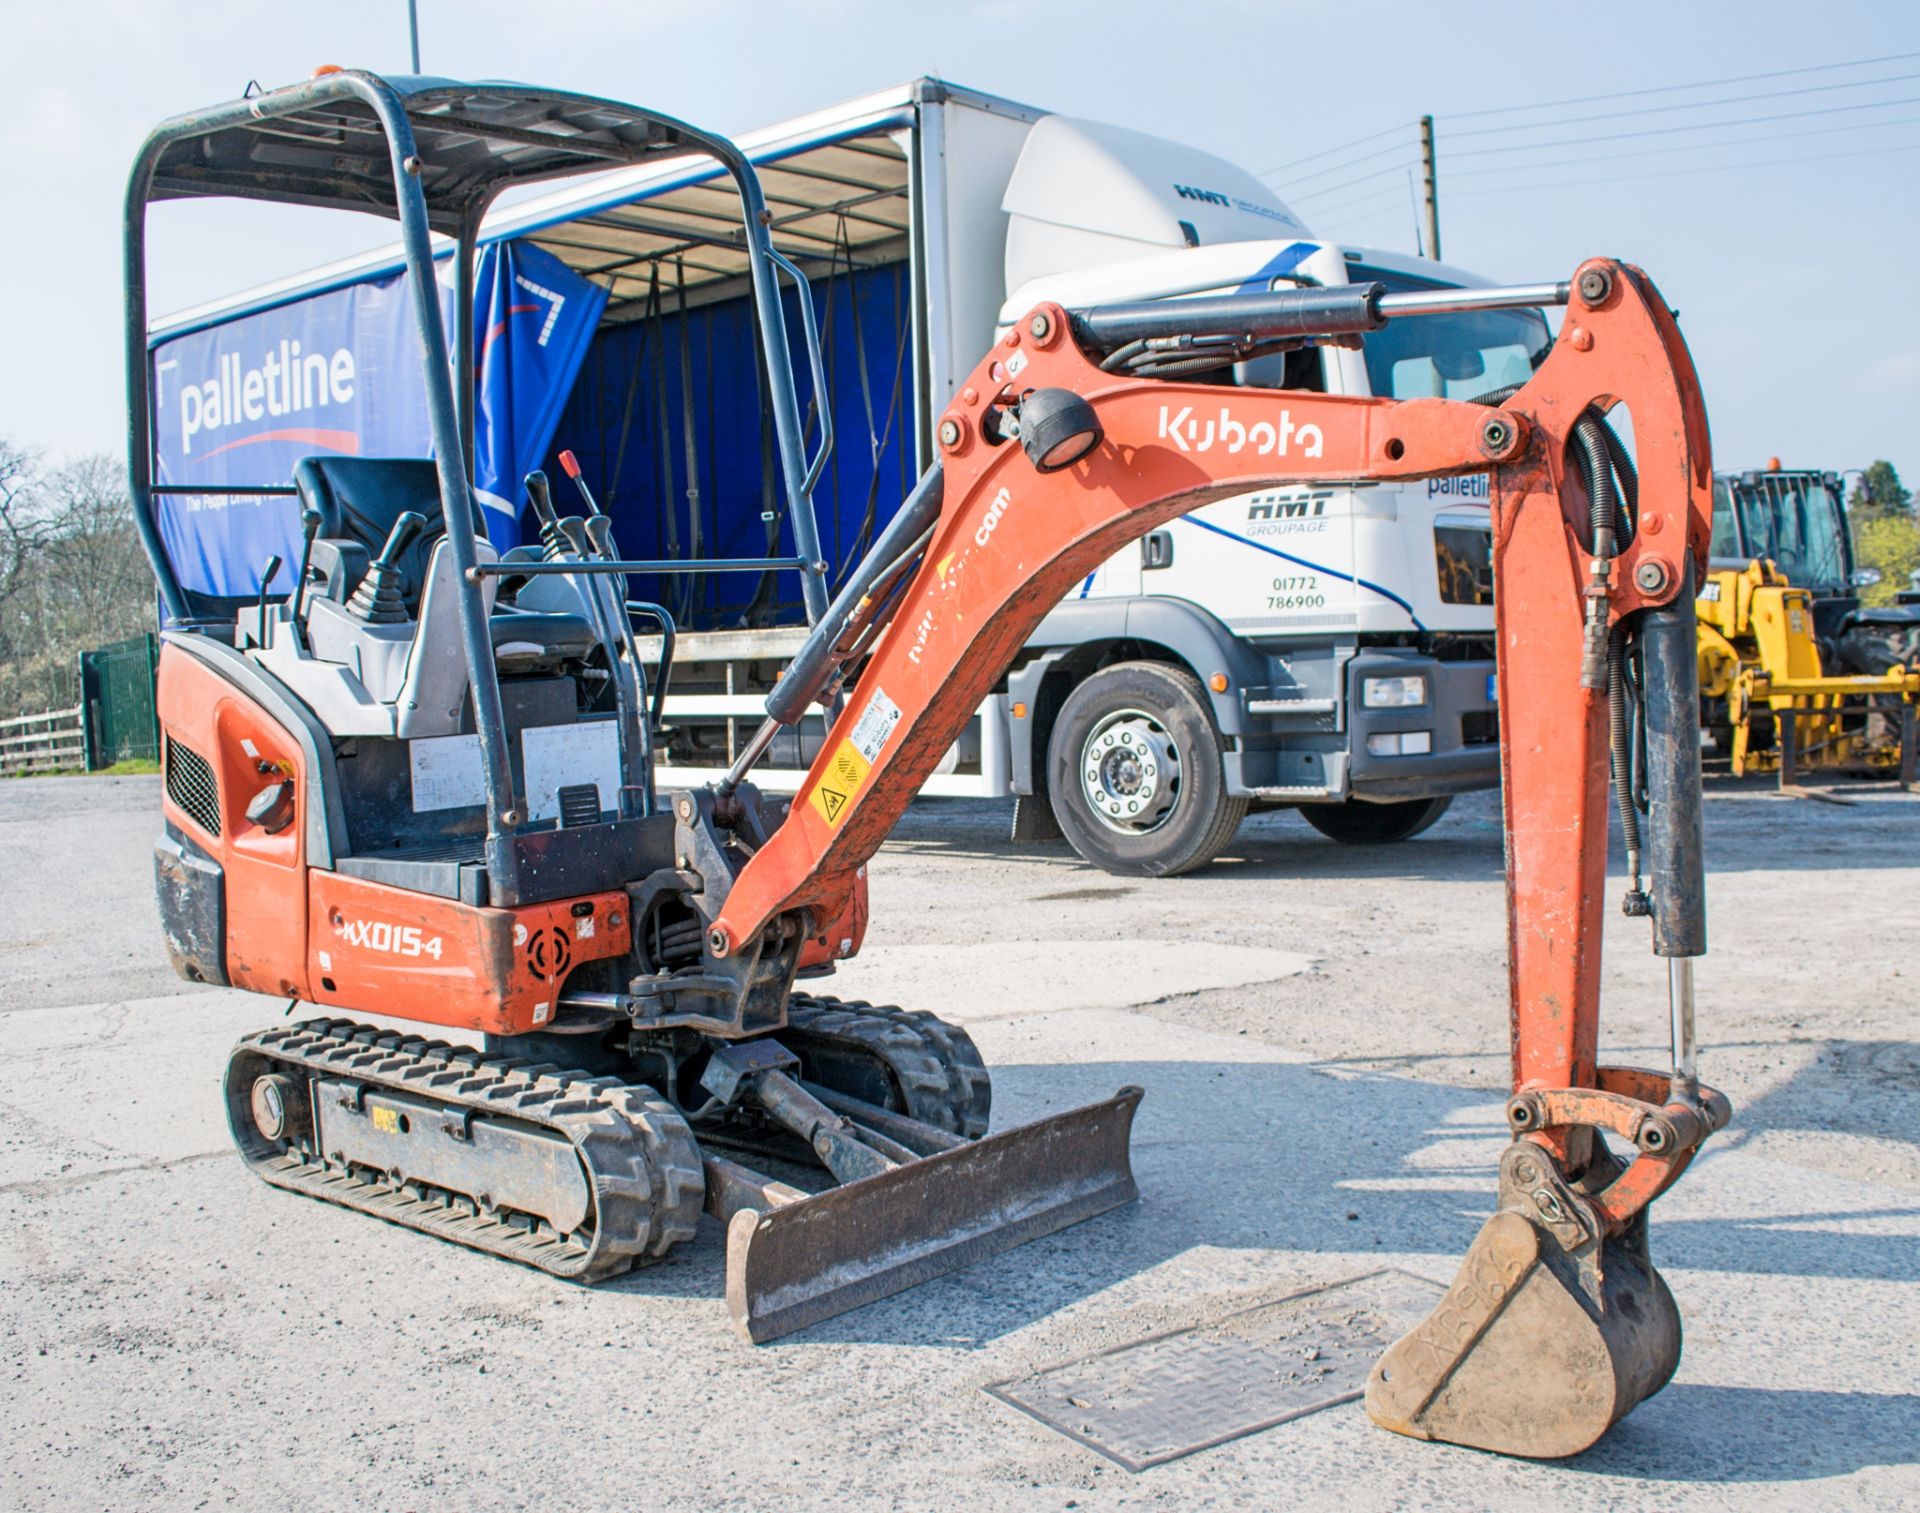 Kubota KX015.4 1.5 tonne rubber tracked excavator Year: 2011 S/N: 55648 Recorded Hours: 2722 - Image 2 of 12